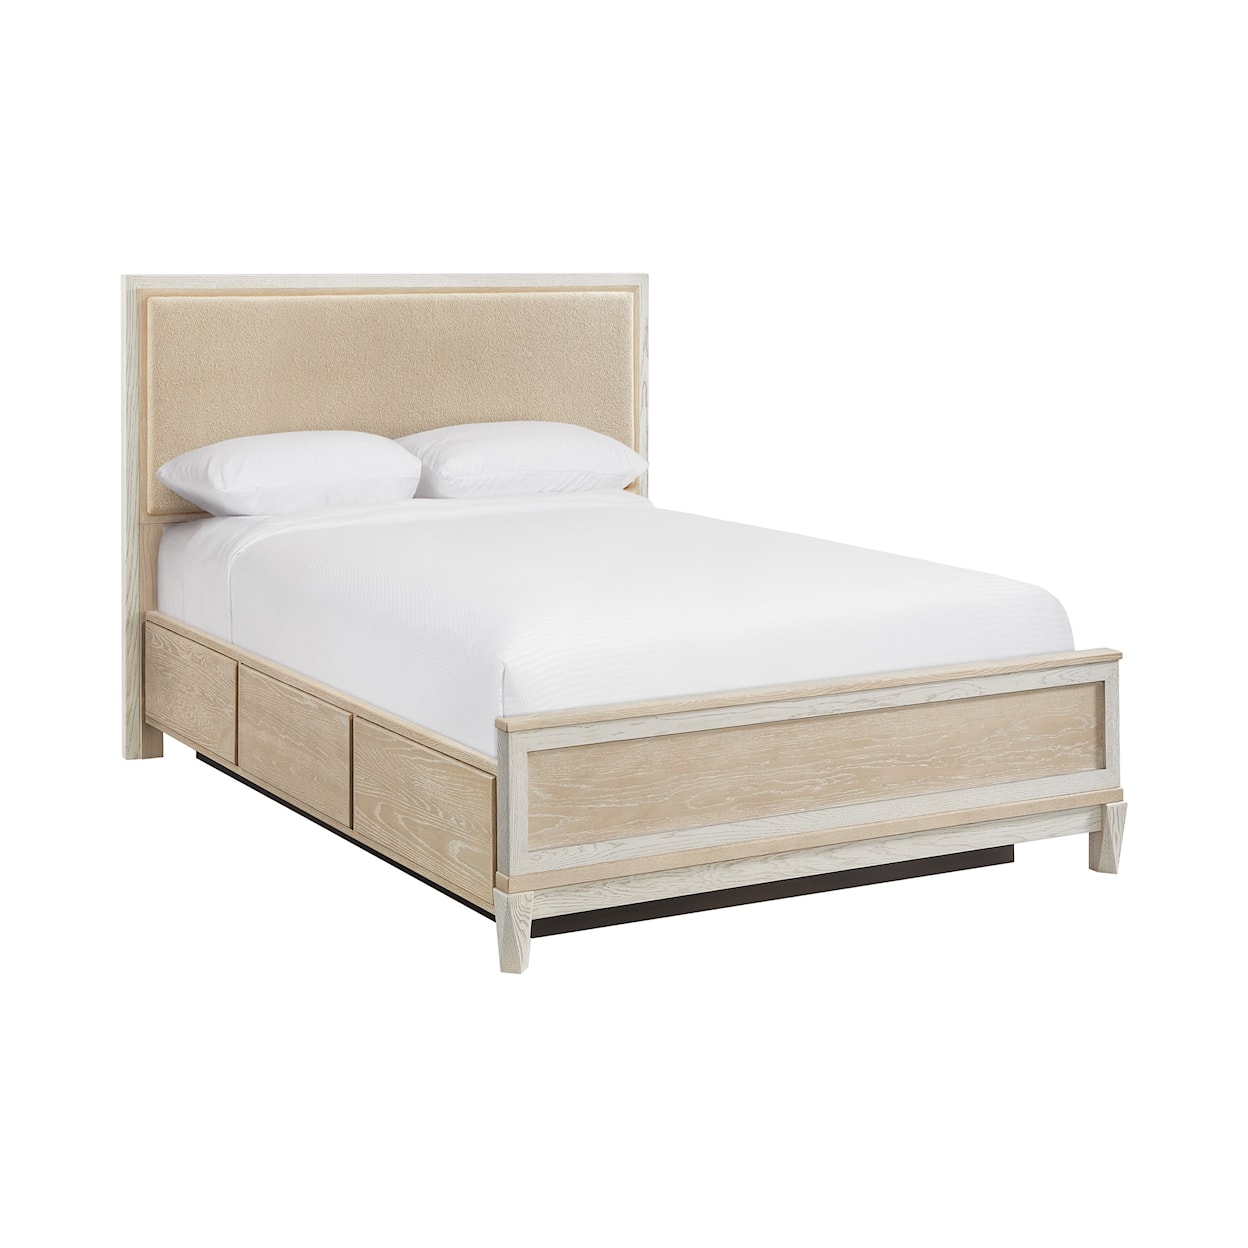 Whittier Wood Catalina Queen Upholstered Panel Storage Bed